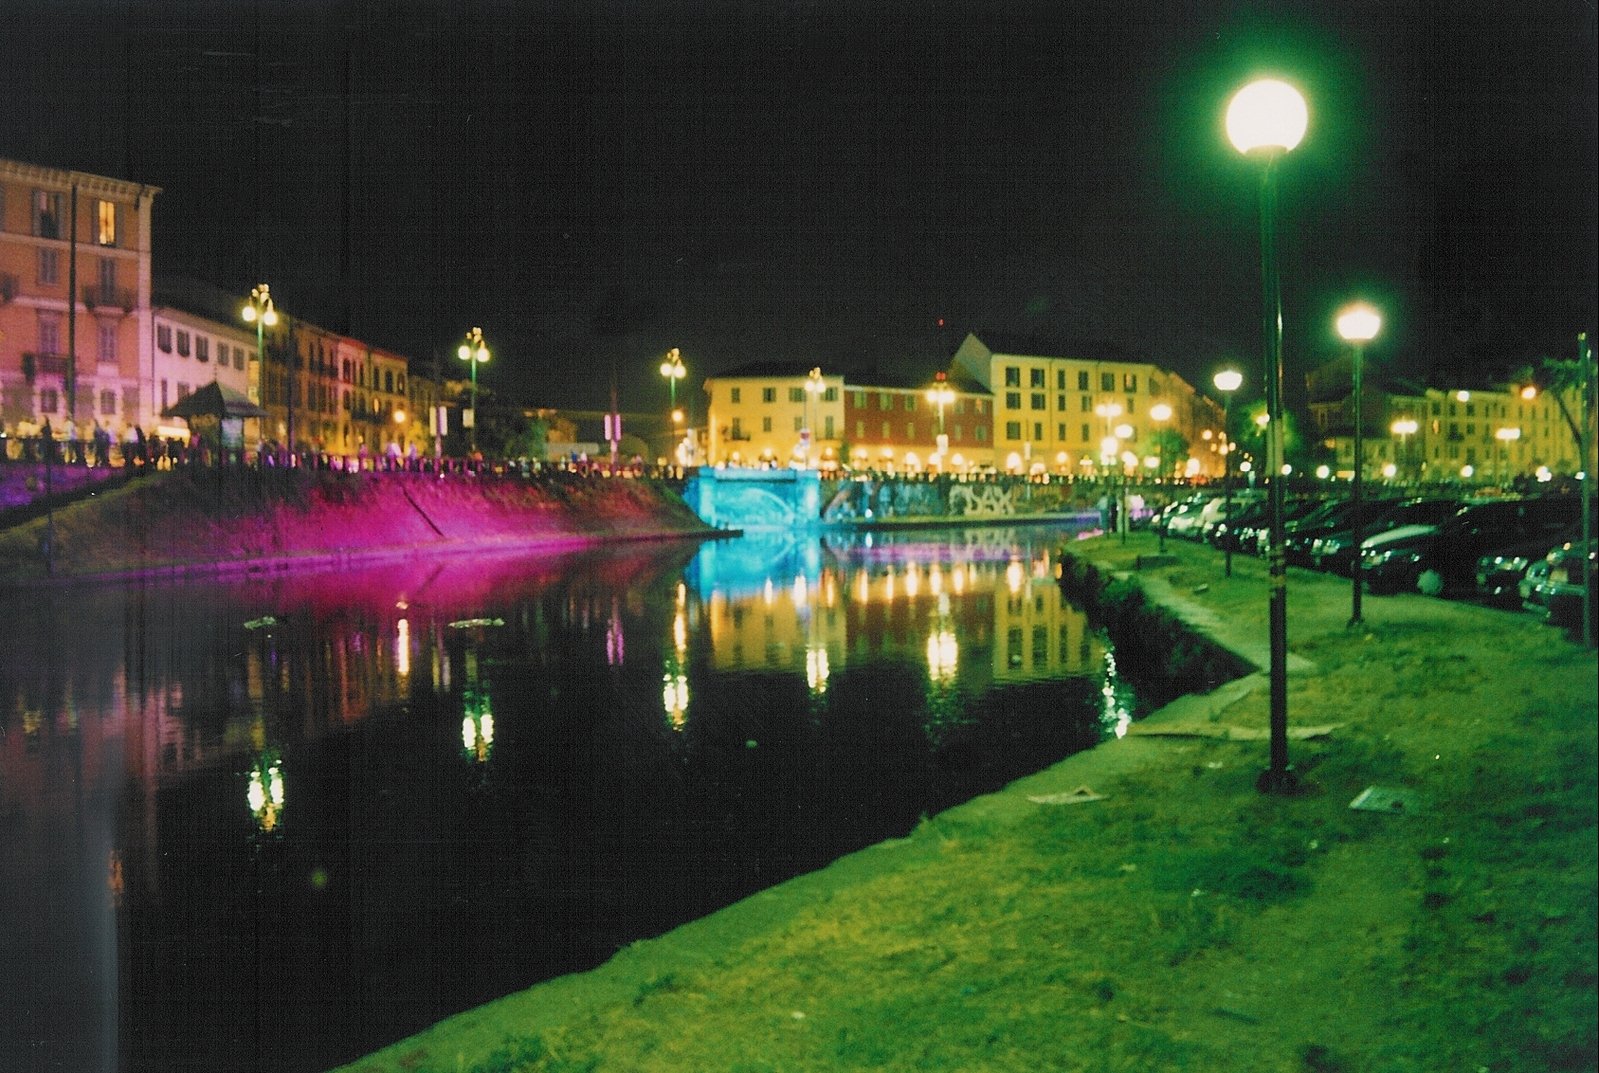 a canal at night time on a city street